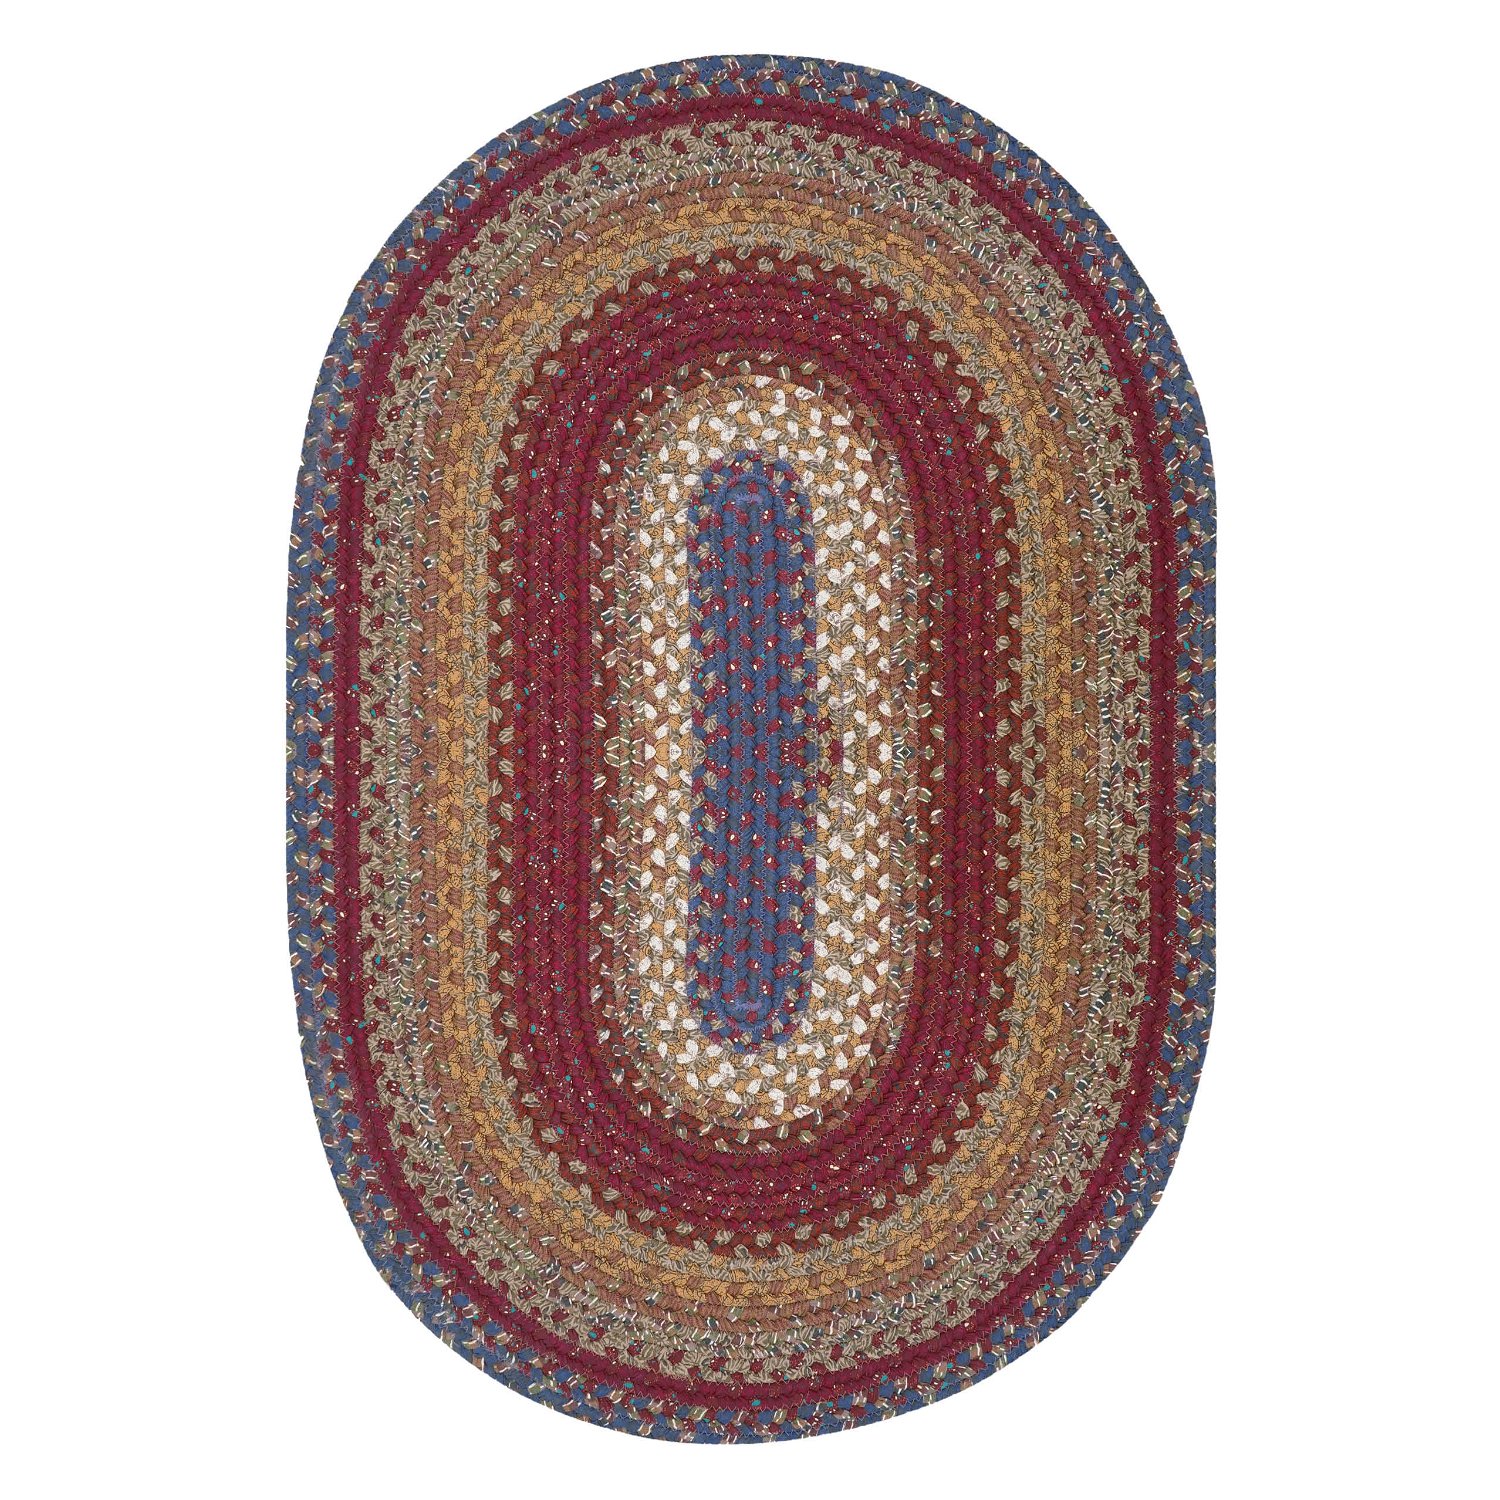 American Braided Rug 2x4 Ft Oval Rug, Multicolor Oval Rug, Oval Braided  Rug, Hand Woven, Vintage Braided Rug, Small Braided Rug -  Canada